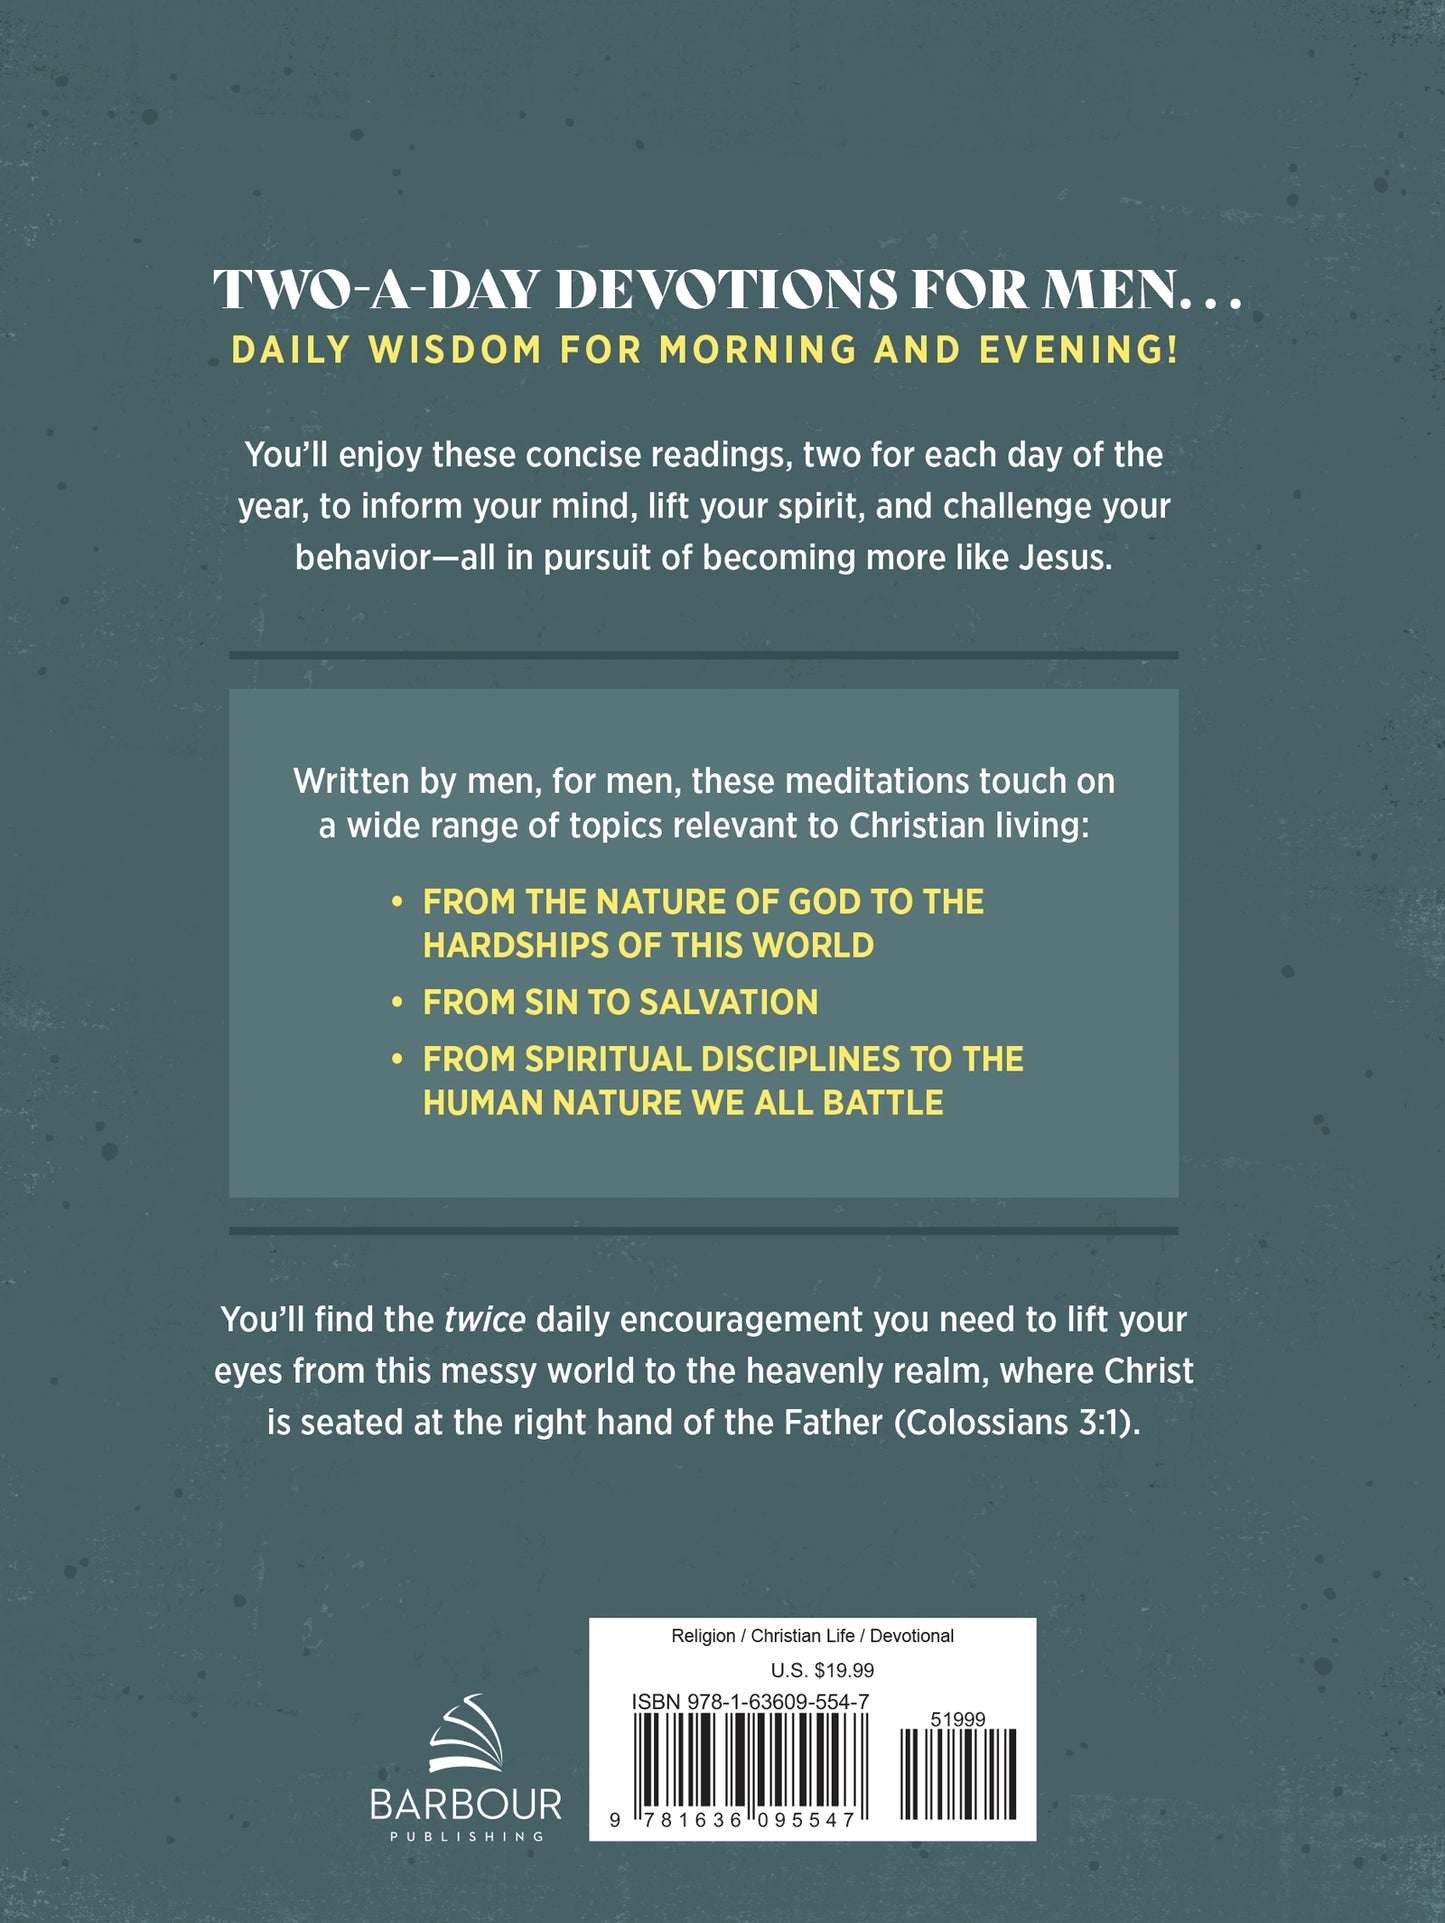 Two-a-Day Devotions for Men - The Christian Gift Company